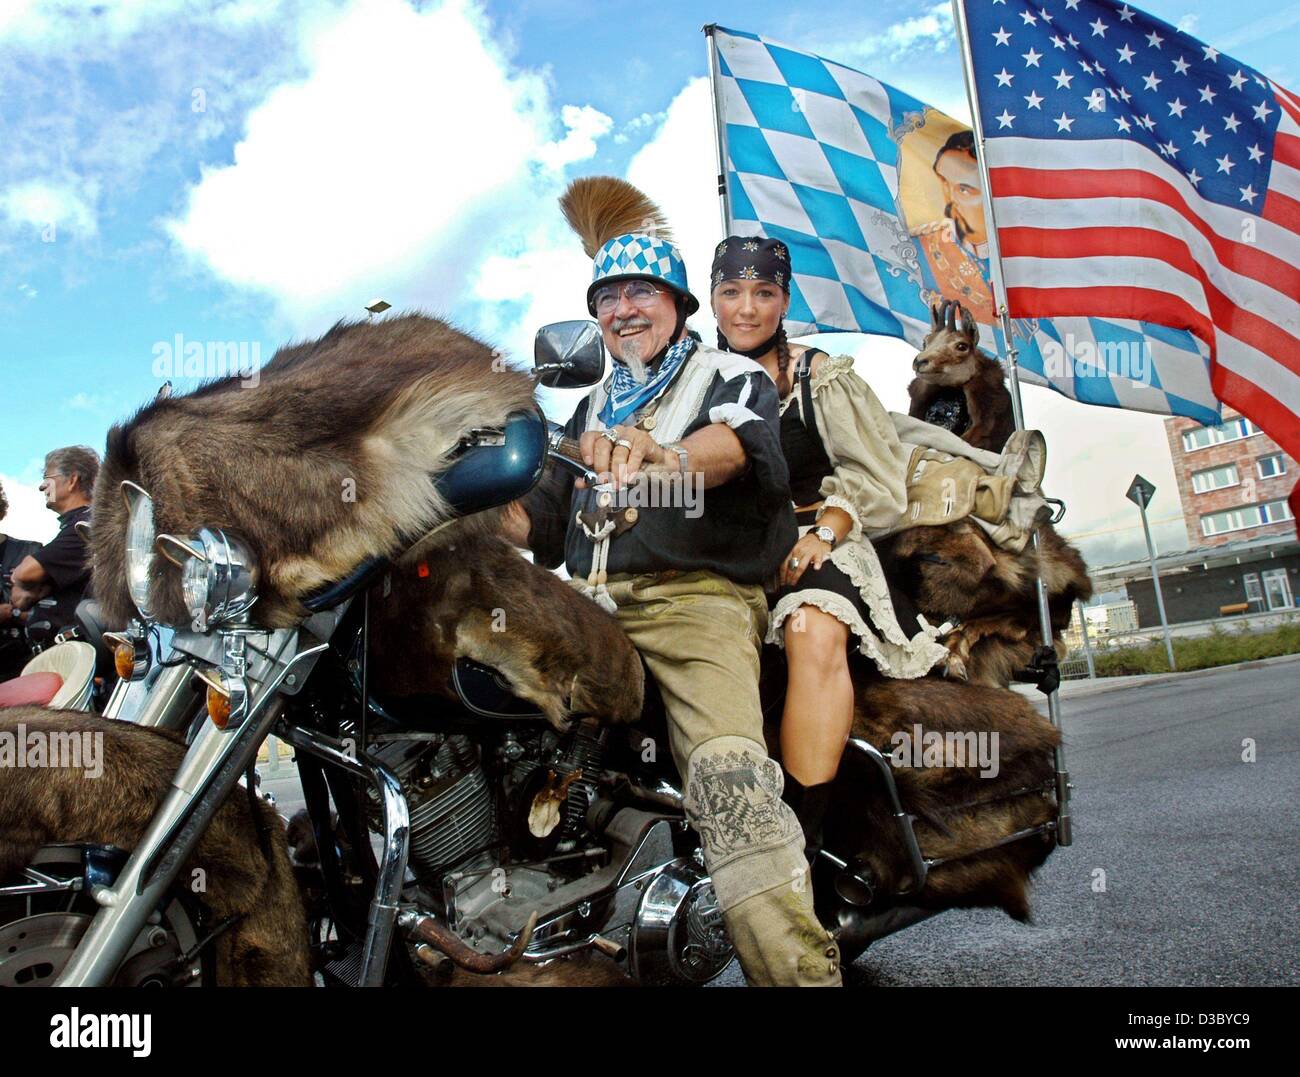 Biker Edgar Dinkel (L) from Munich and his daughter Sabine ride on their  Harley, which is adorned with all sorts of fur accessories, the Bavarian  and American flag, during the Harley Davidson